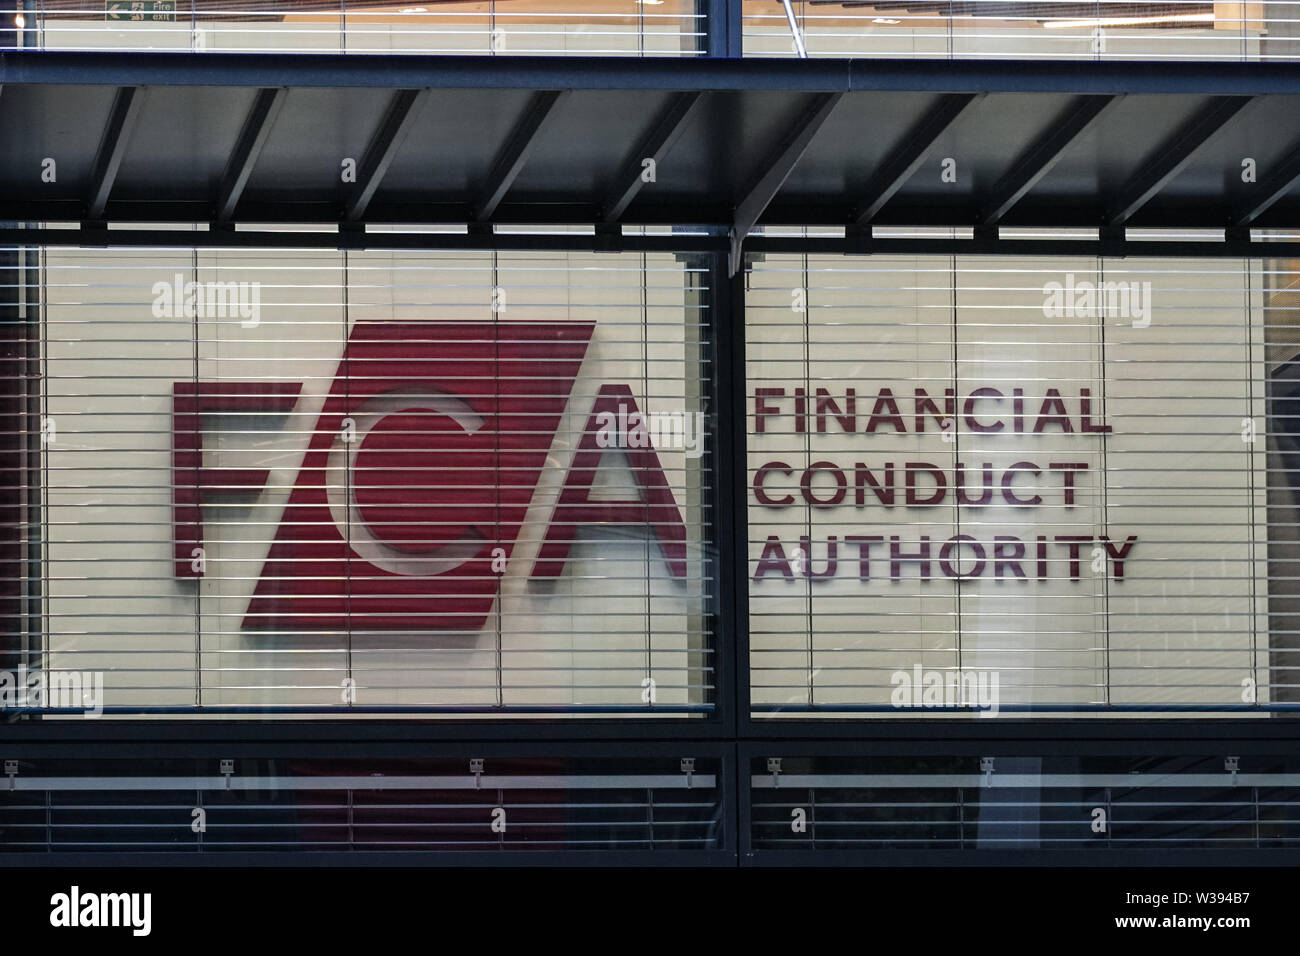 Financial Conduct Authority (FCA) headquarters in London, England United Kingdom UK Stock Photo